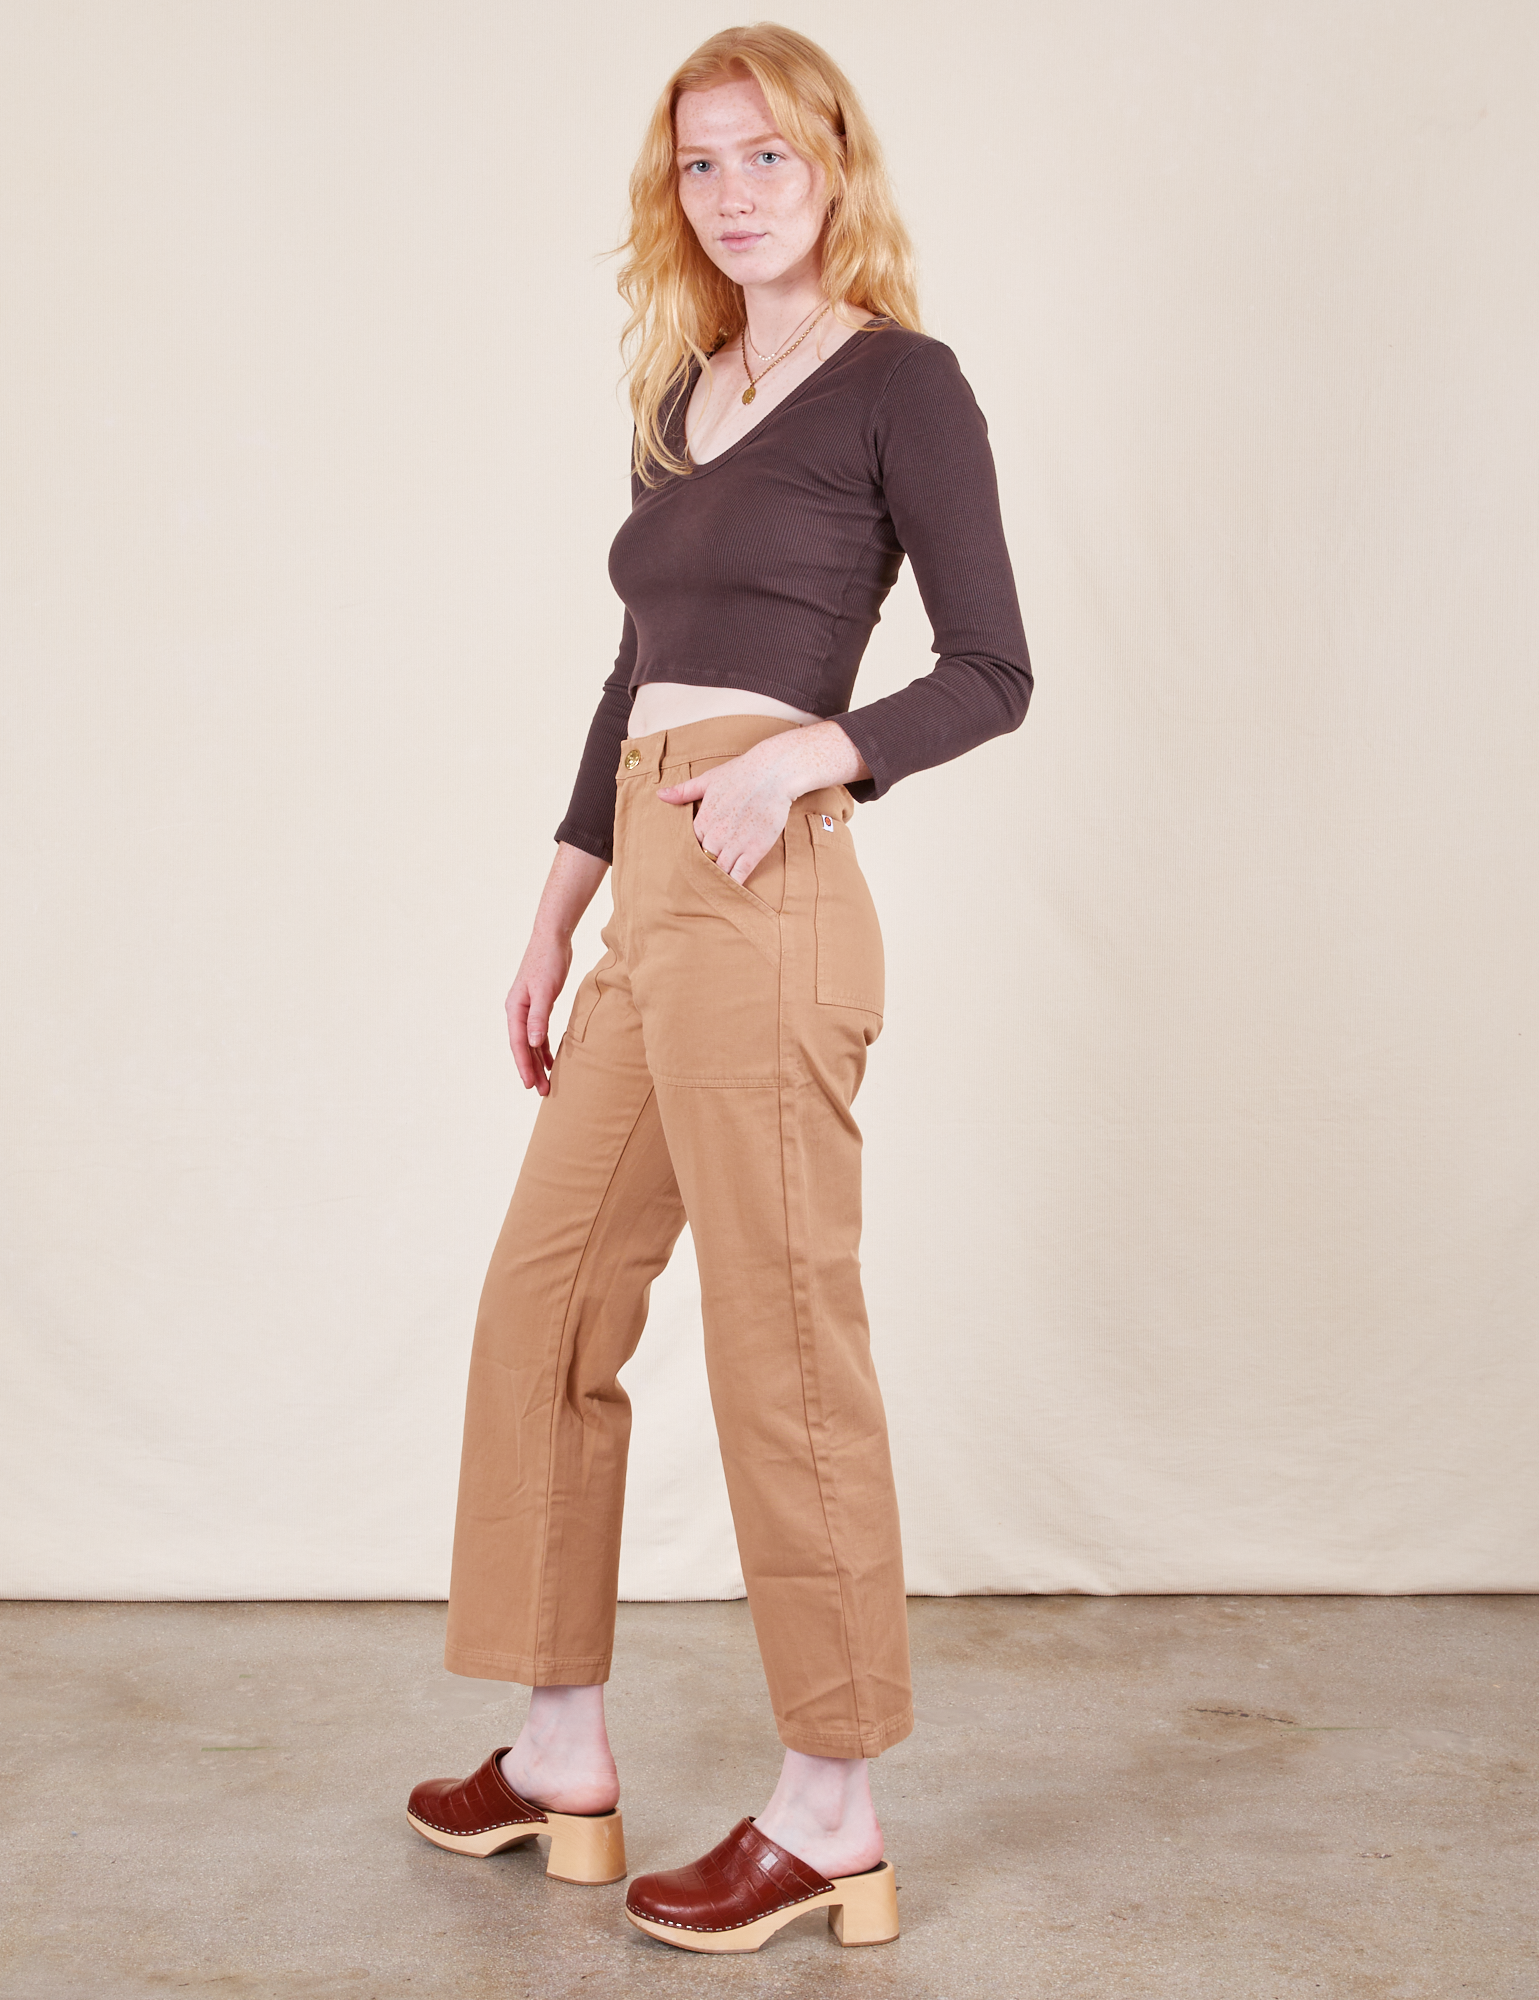 Side view of Work Pants in Tan and espresso brown Long Sleeve V-Neck Tee on Margaret